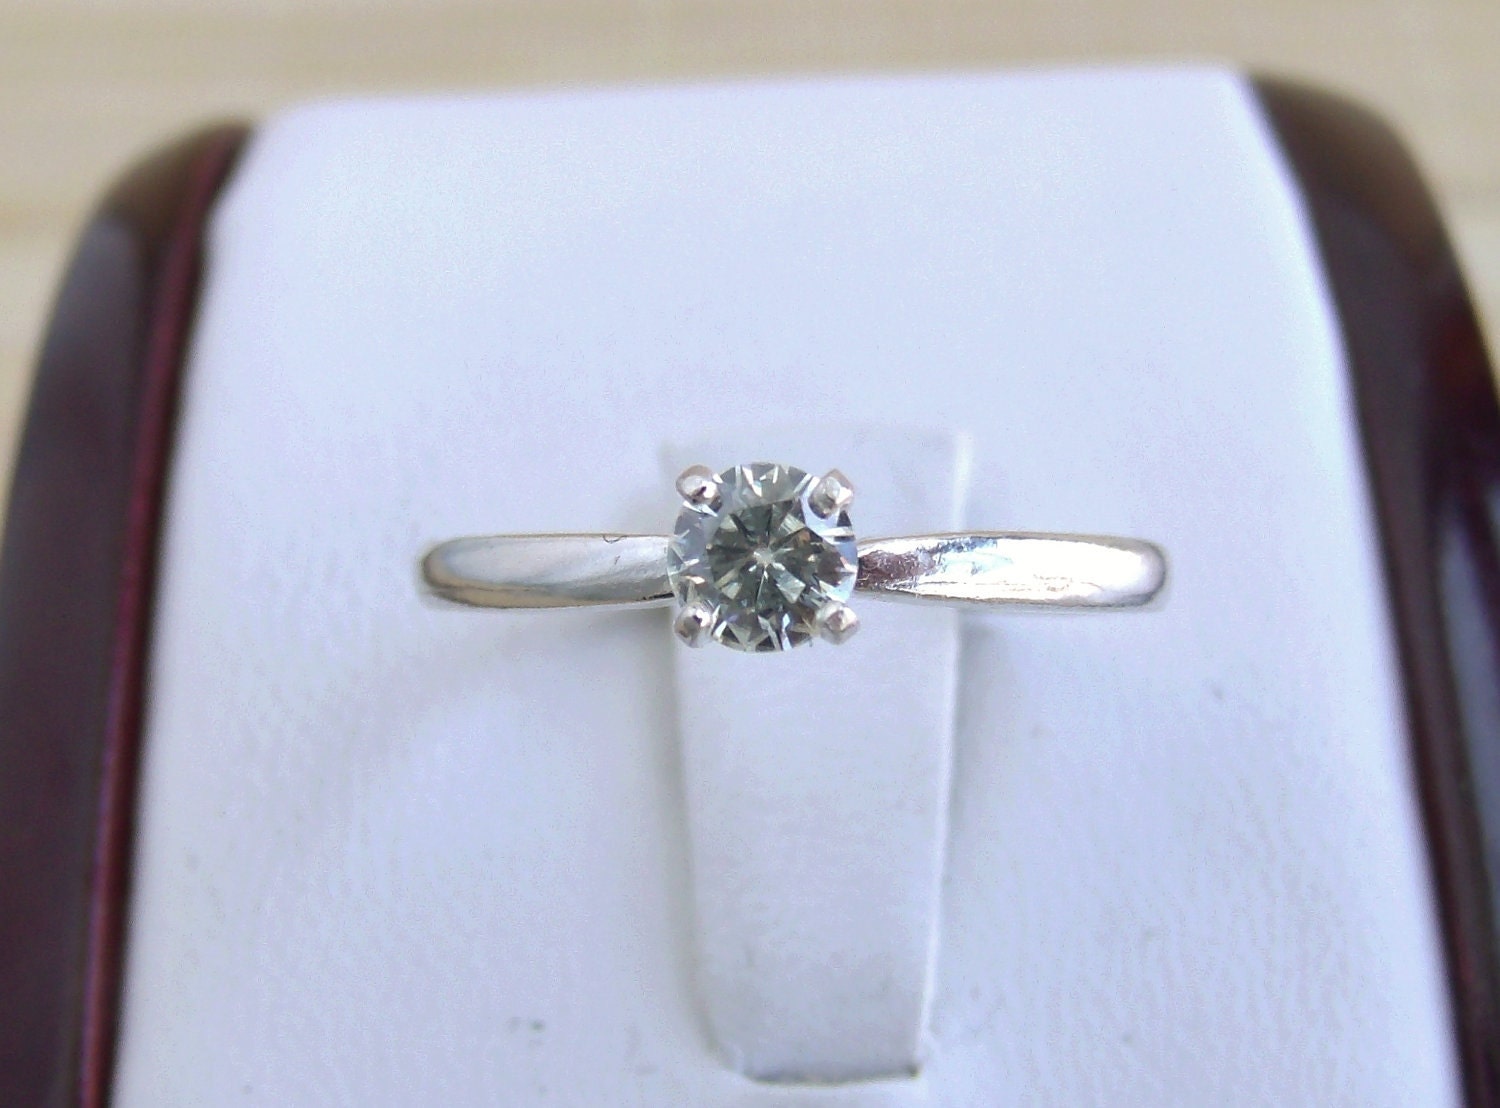    Wedding Rings on His And Her Wedding Set Moissanite Ring Sterling By Katdesignsnyc